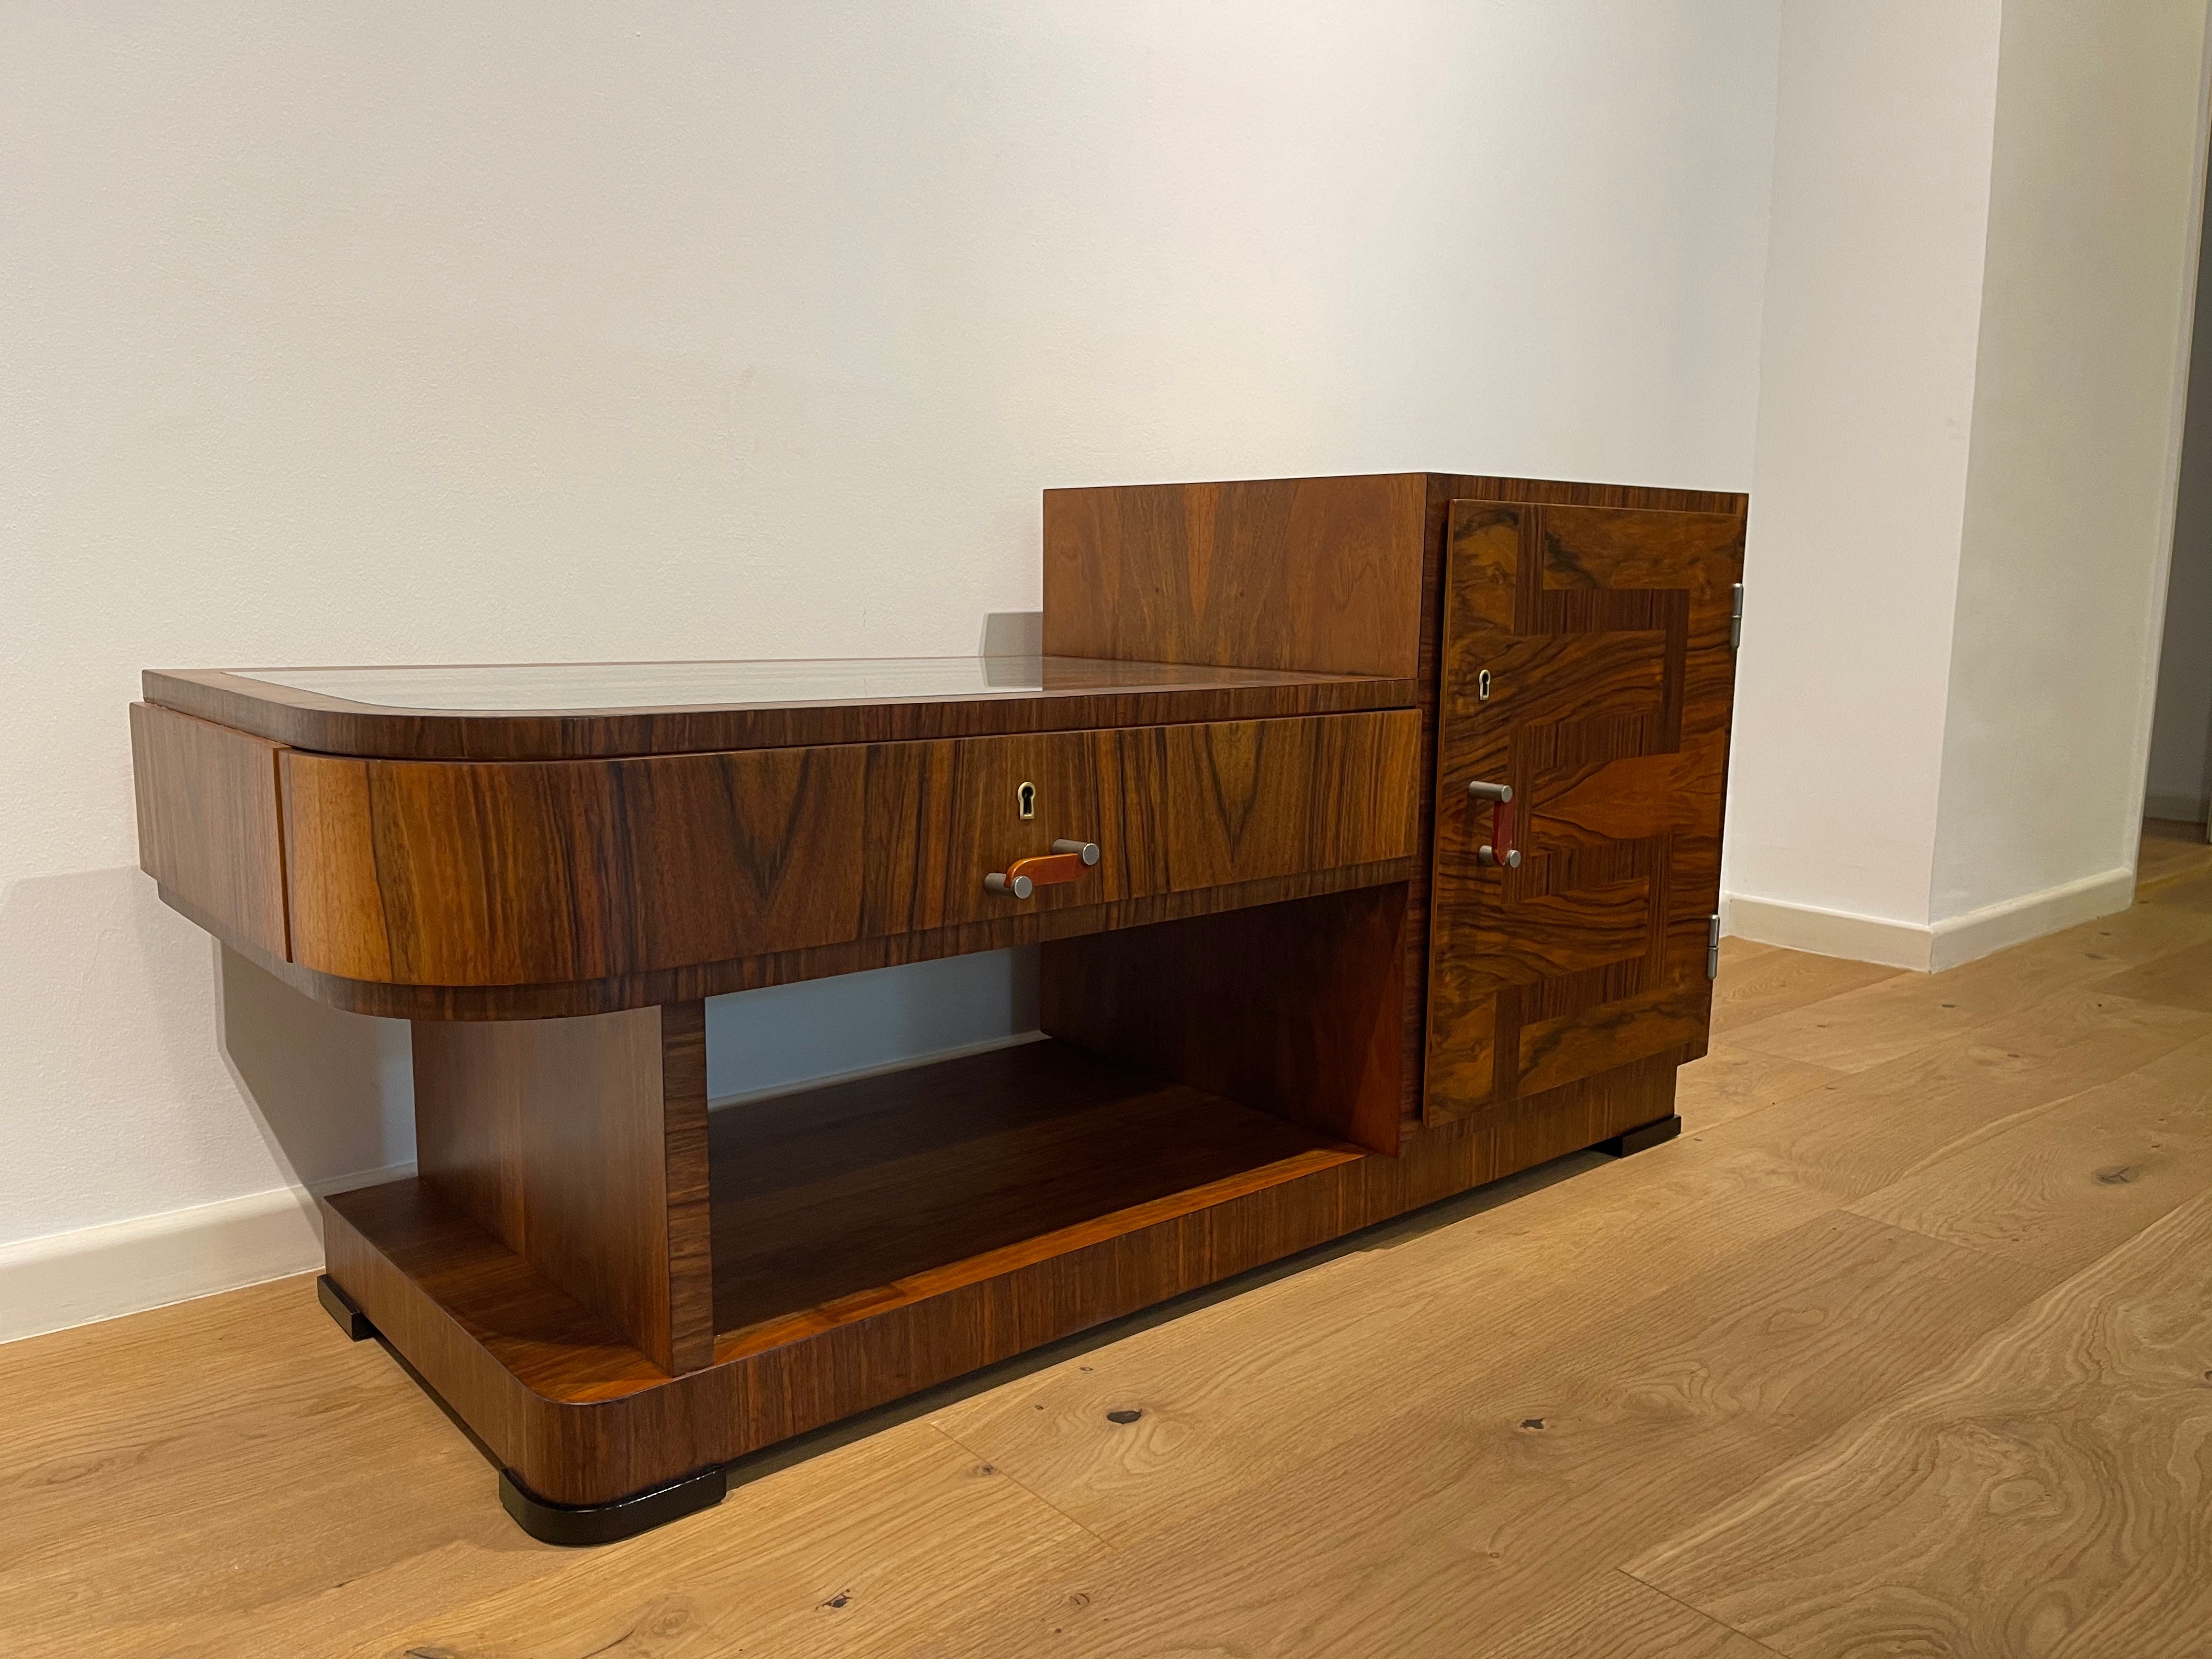 Hungarian Art Deco Sideboard by Károly Lingel, Hungary, 1930s For Sale